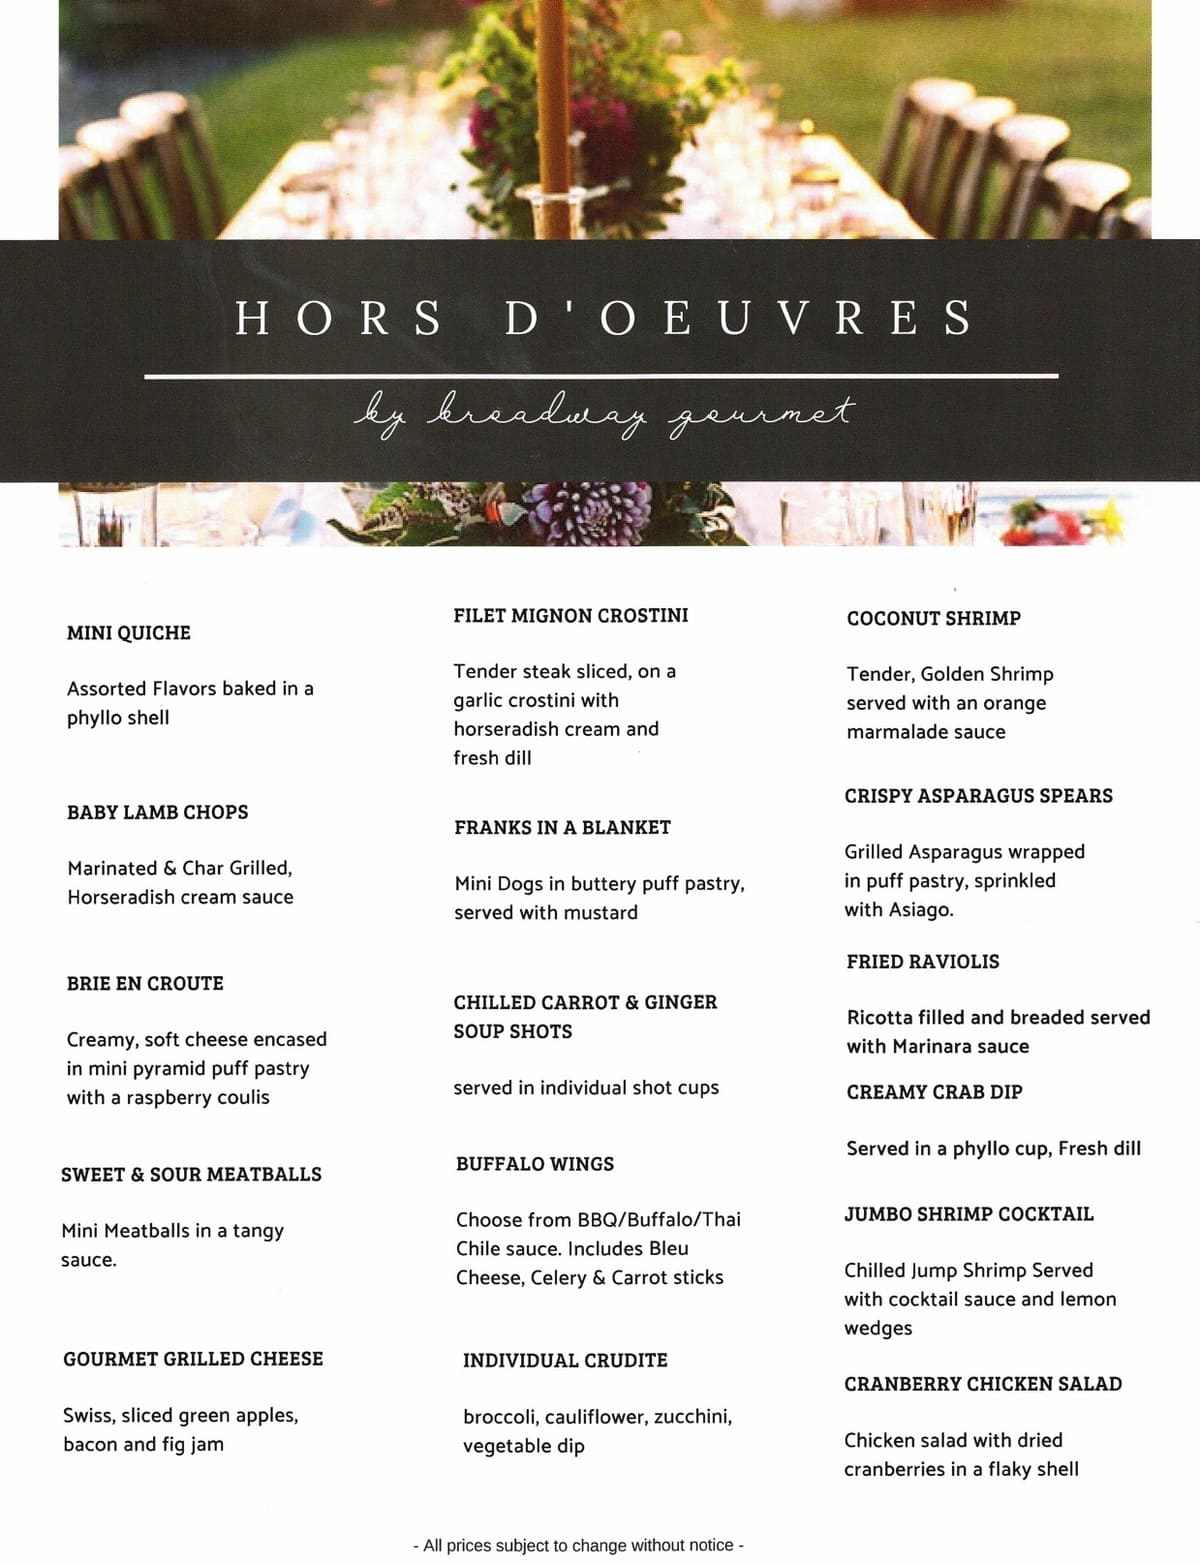 Catering Menu - Hors D'oeuvres